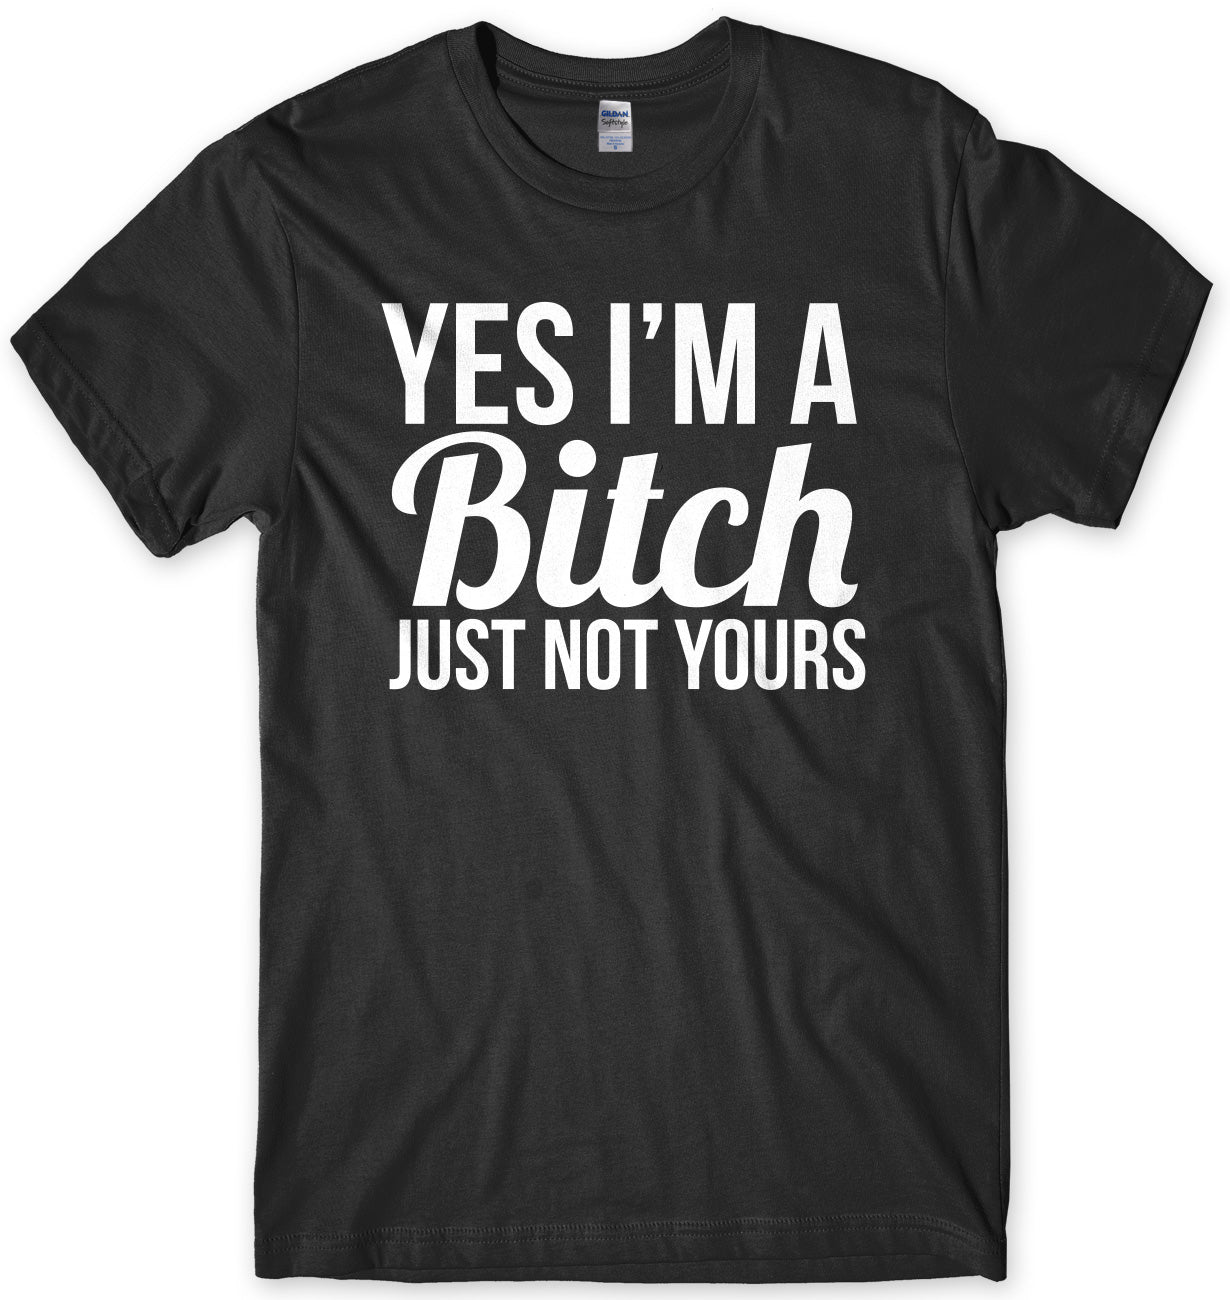 Yes I'm A Bitch Just Not Yours Mens Unisex T-Shirt